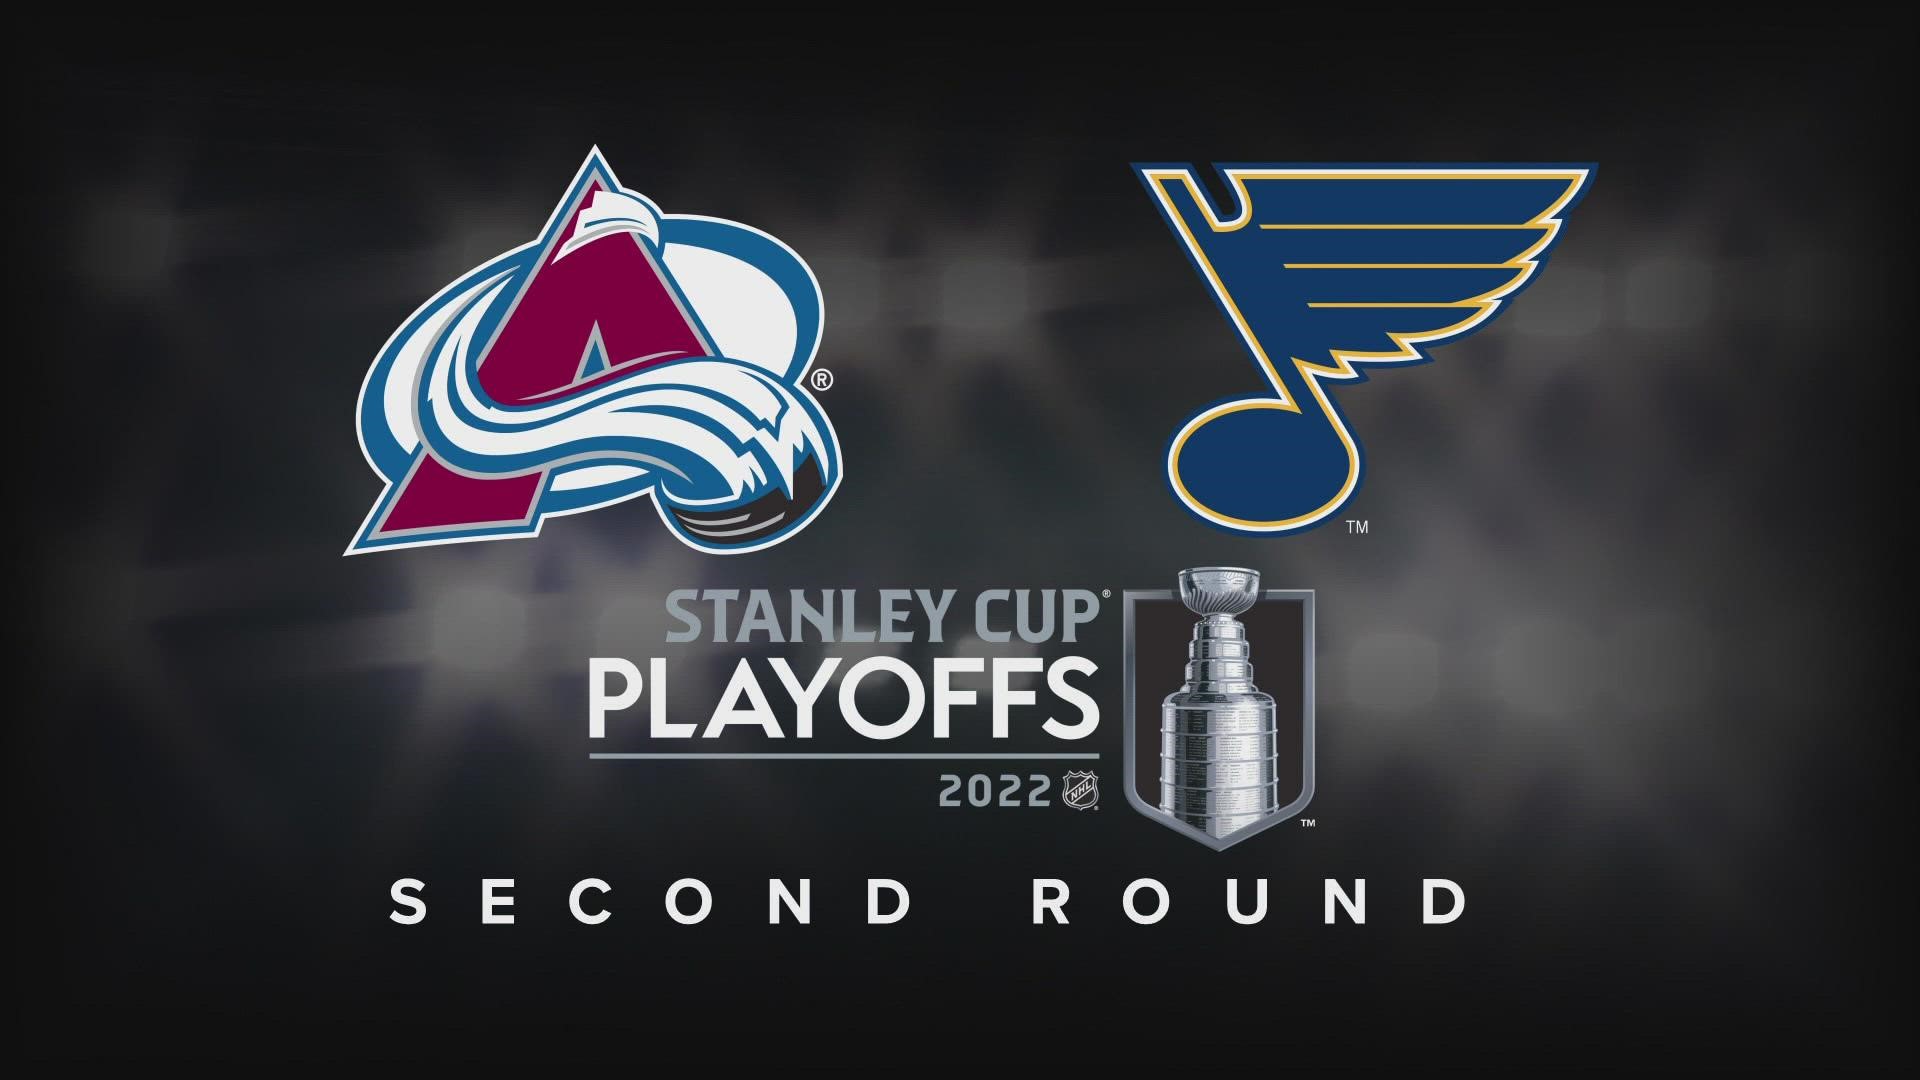 Colorado and St. Louis face each other in the second round of the 2022 NHL playoffs.